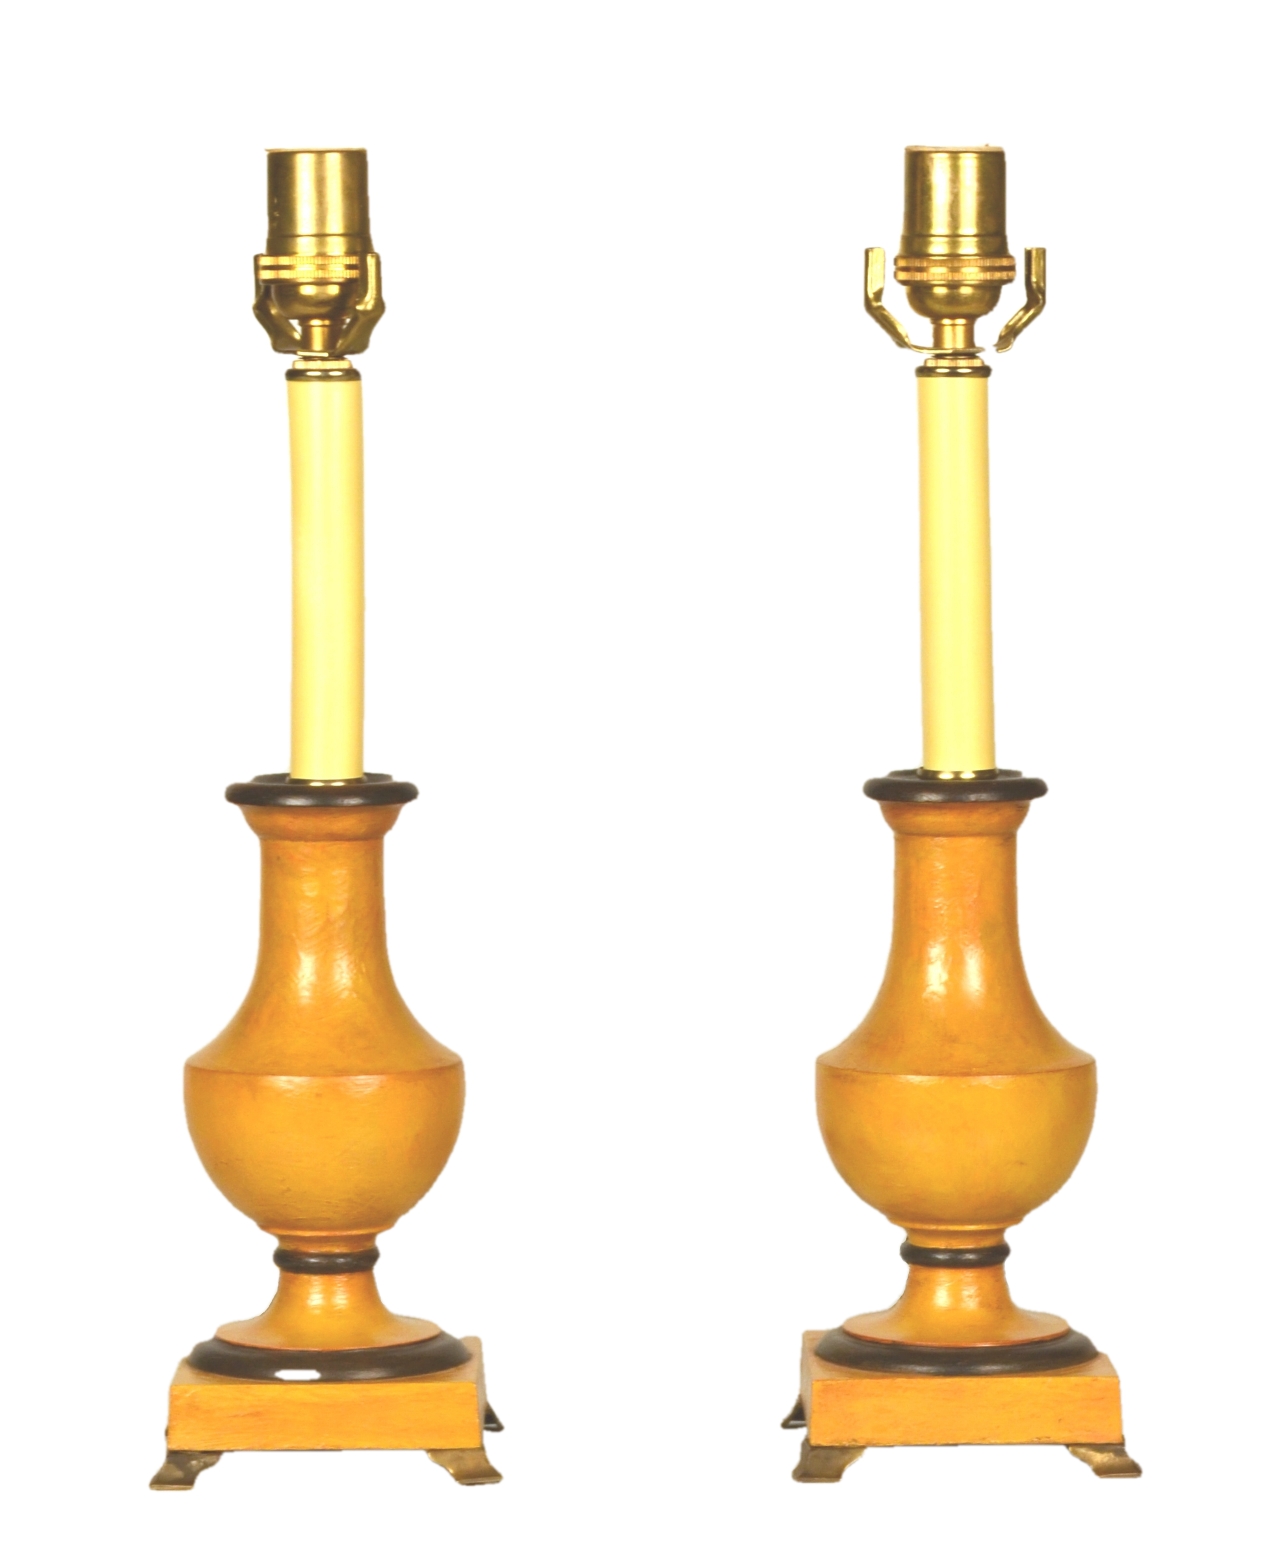 Pair of Turned Wood Baluster Lamps